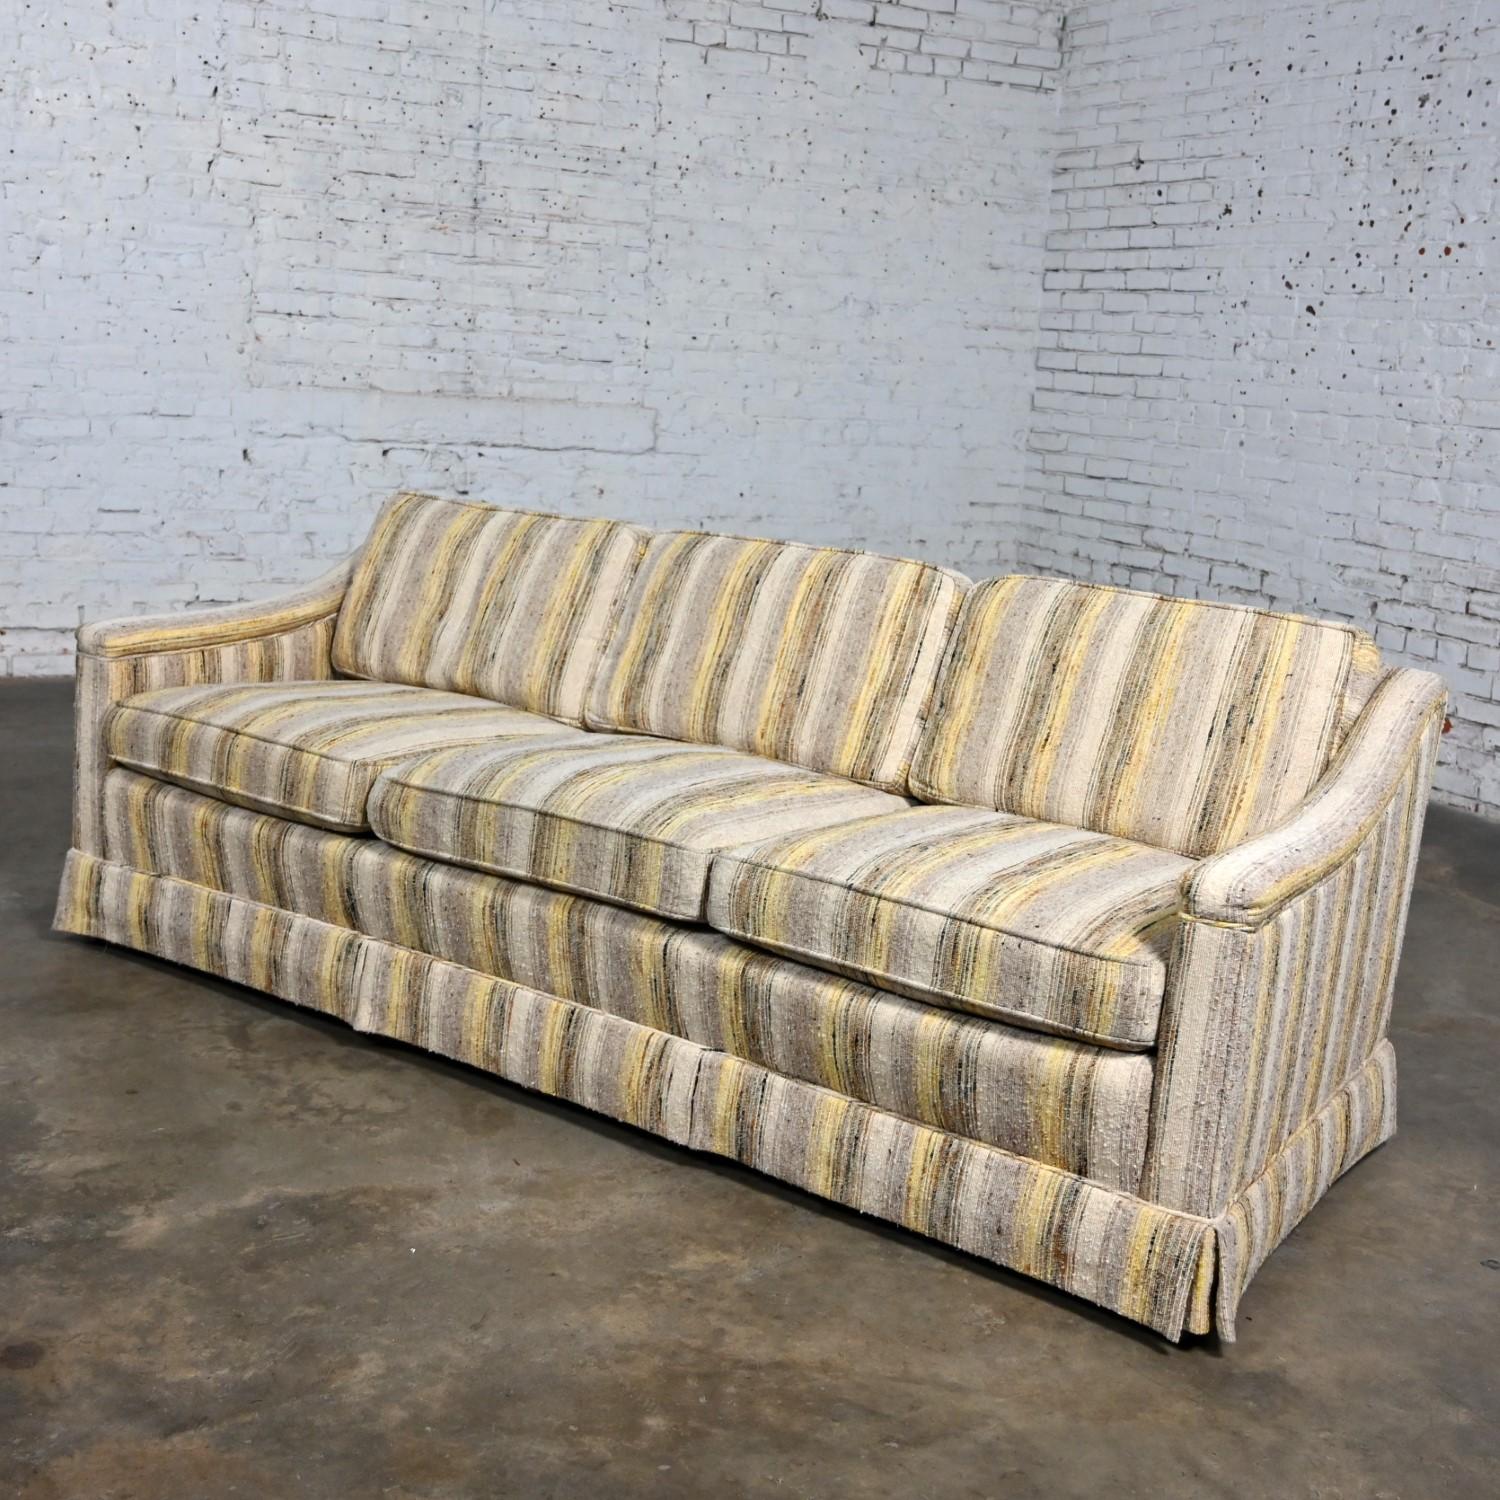 Mid-Century Modern Henredon Sofa Modified Lawson Style Yellow & Beige Striped In Good Condition For Sale In Topeka, KS